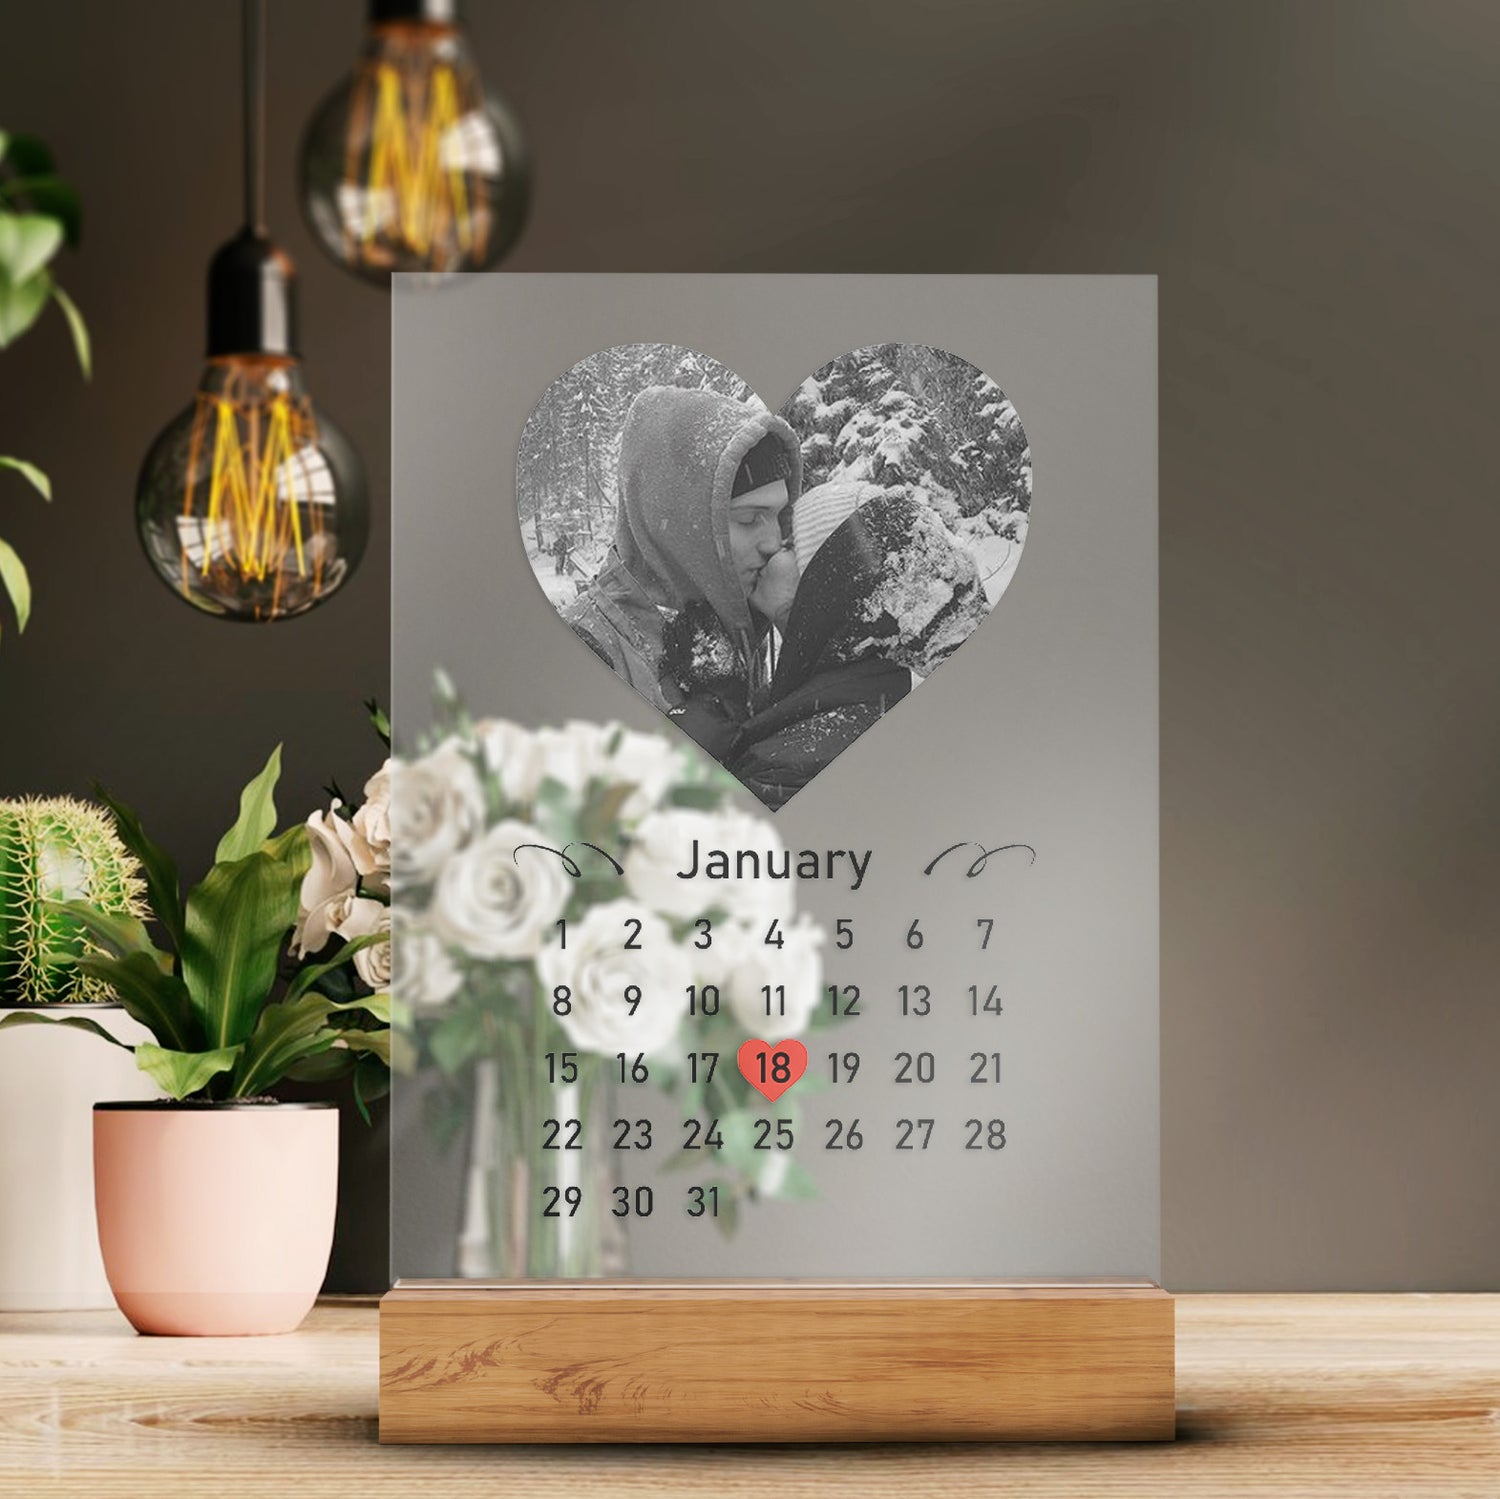 Personalized Transparent Plaque with Calendar and Photo